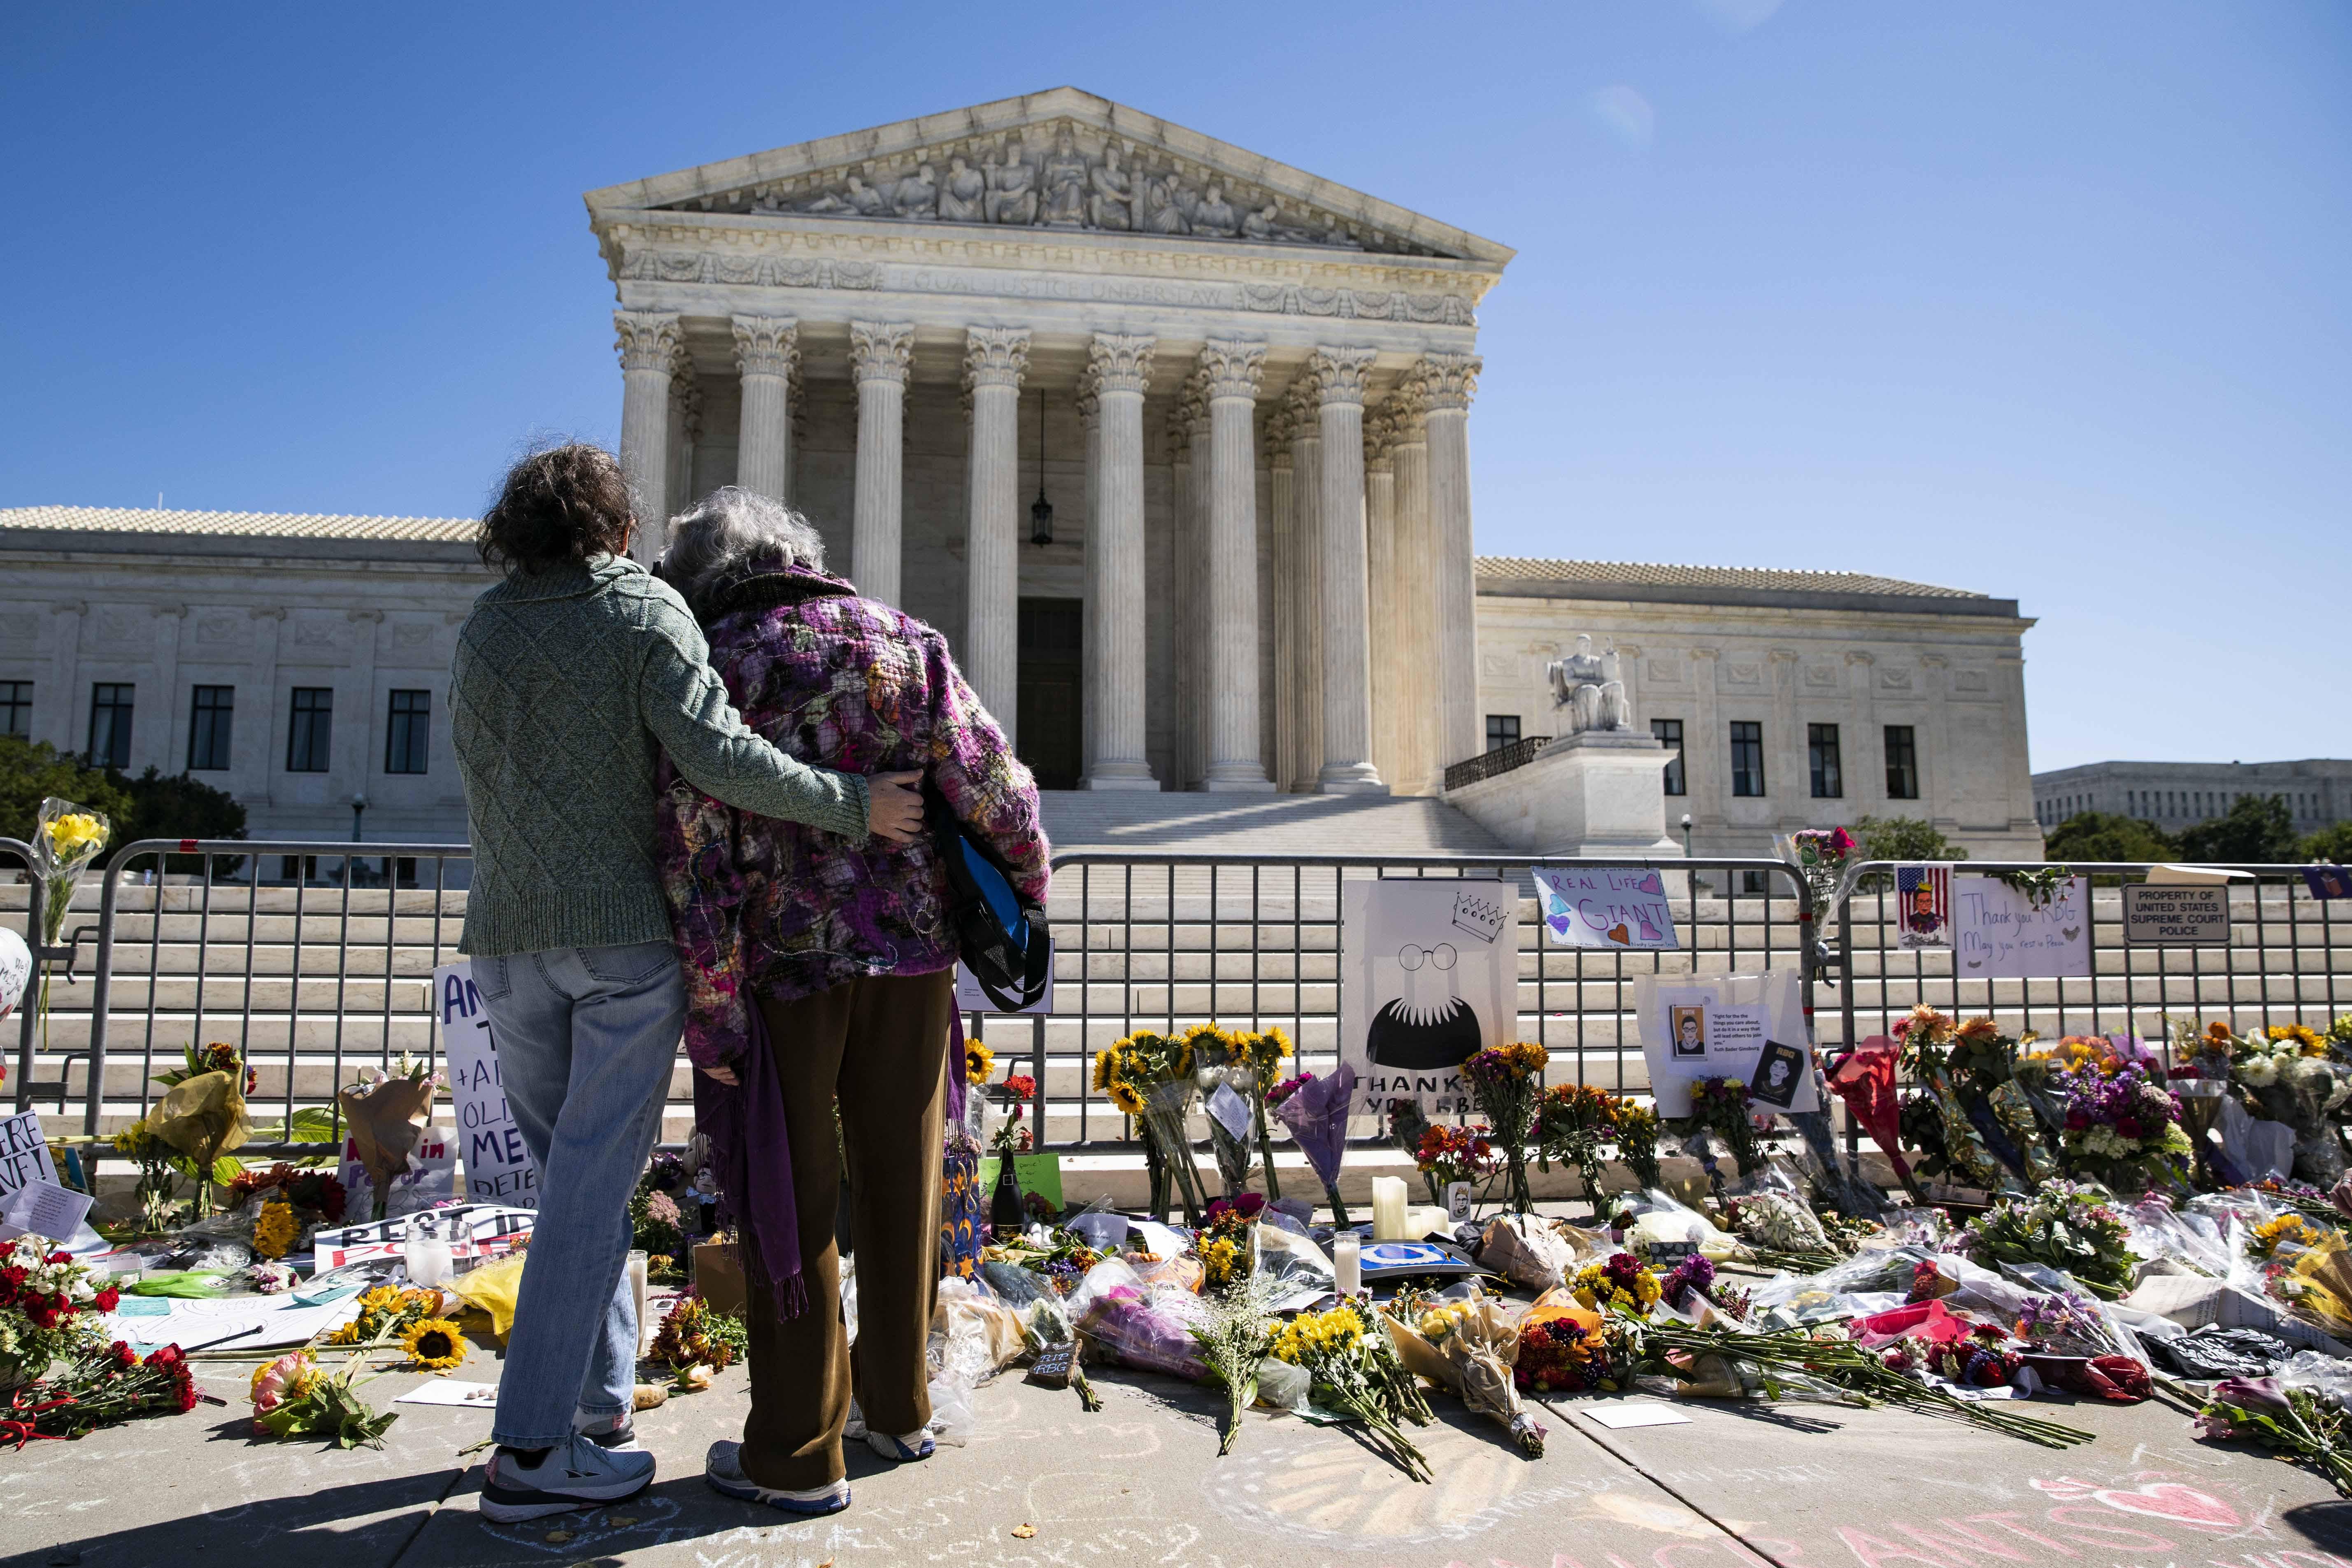 Women embrace in front of a makeshift memorial of flowers for late Supreme Court Justice Ruth Bader Ginsburg